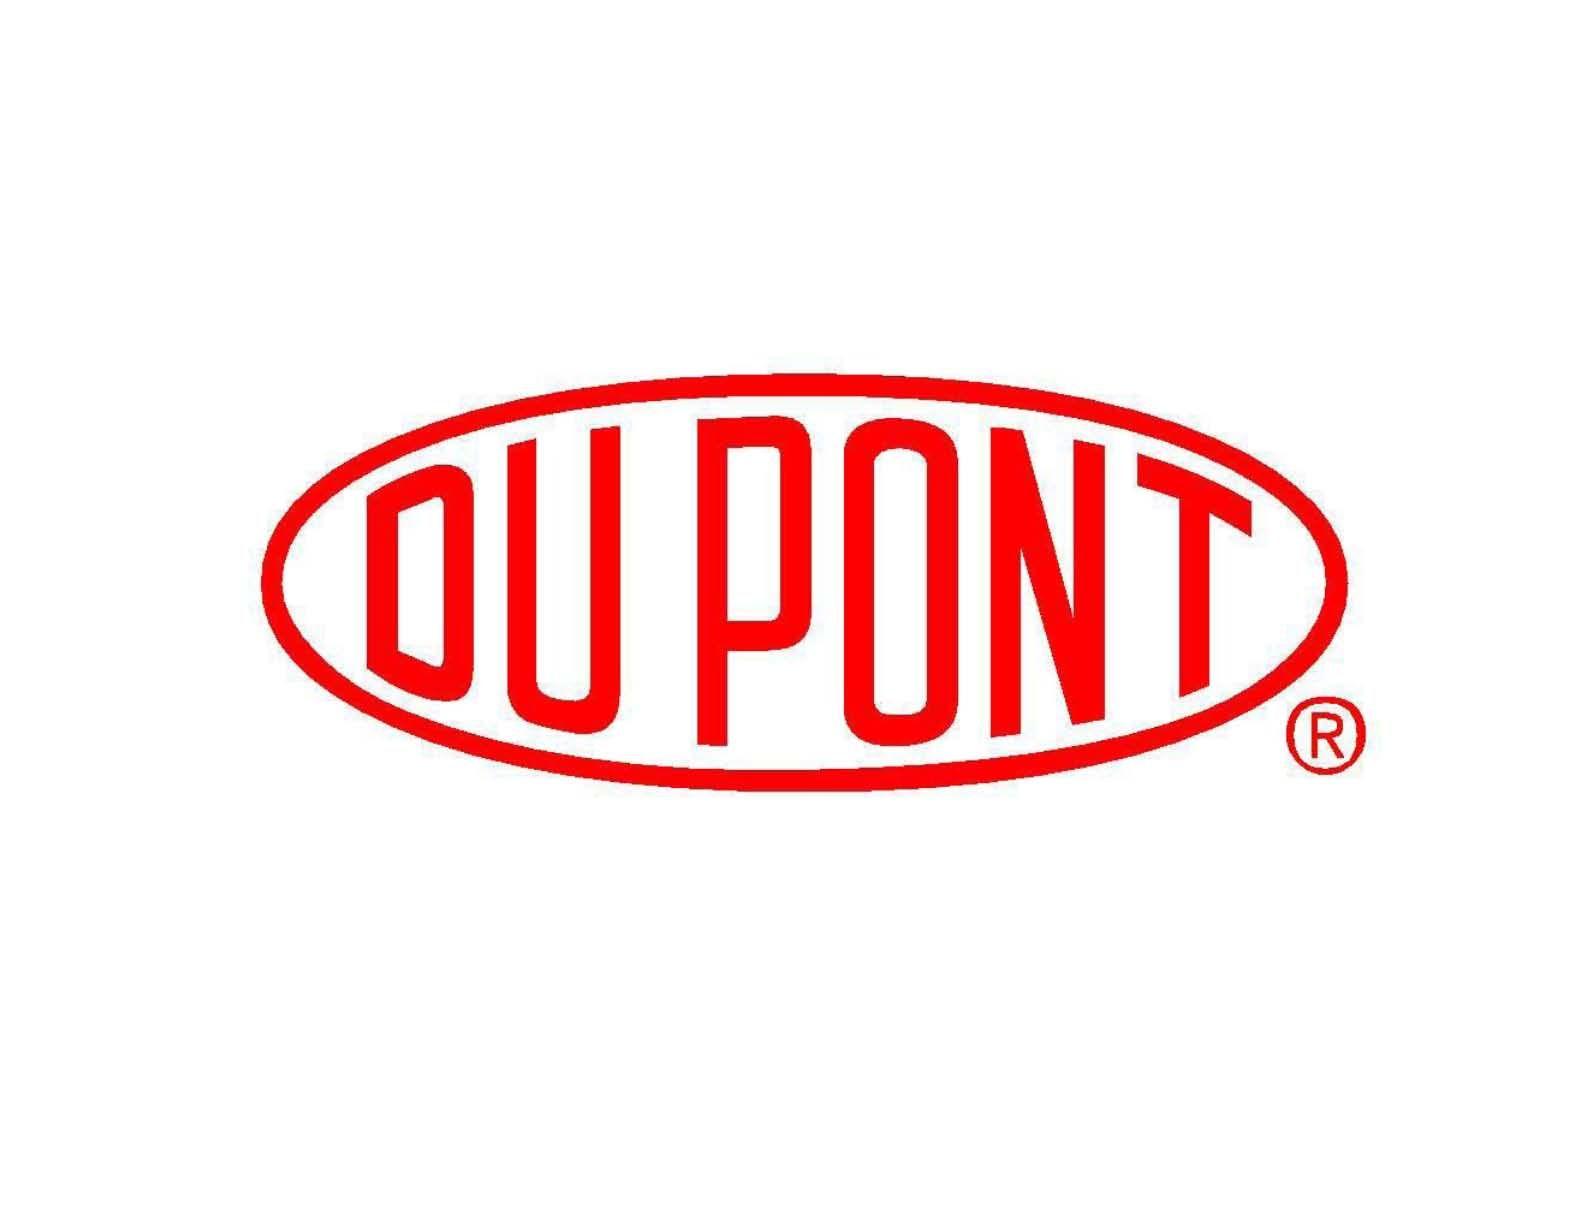 Monsanto Oval Logo - Quick Reasons to Dislike DuPont as Much as Monsanto